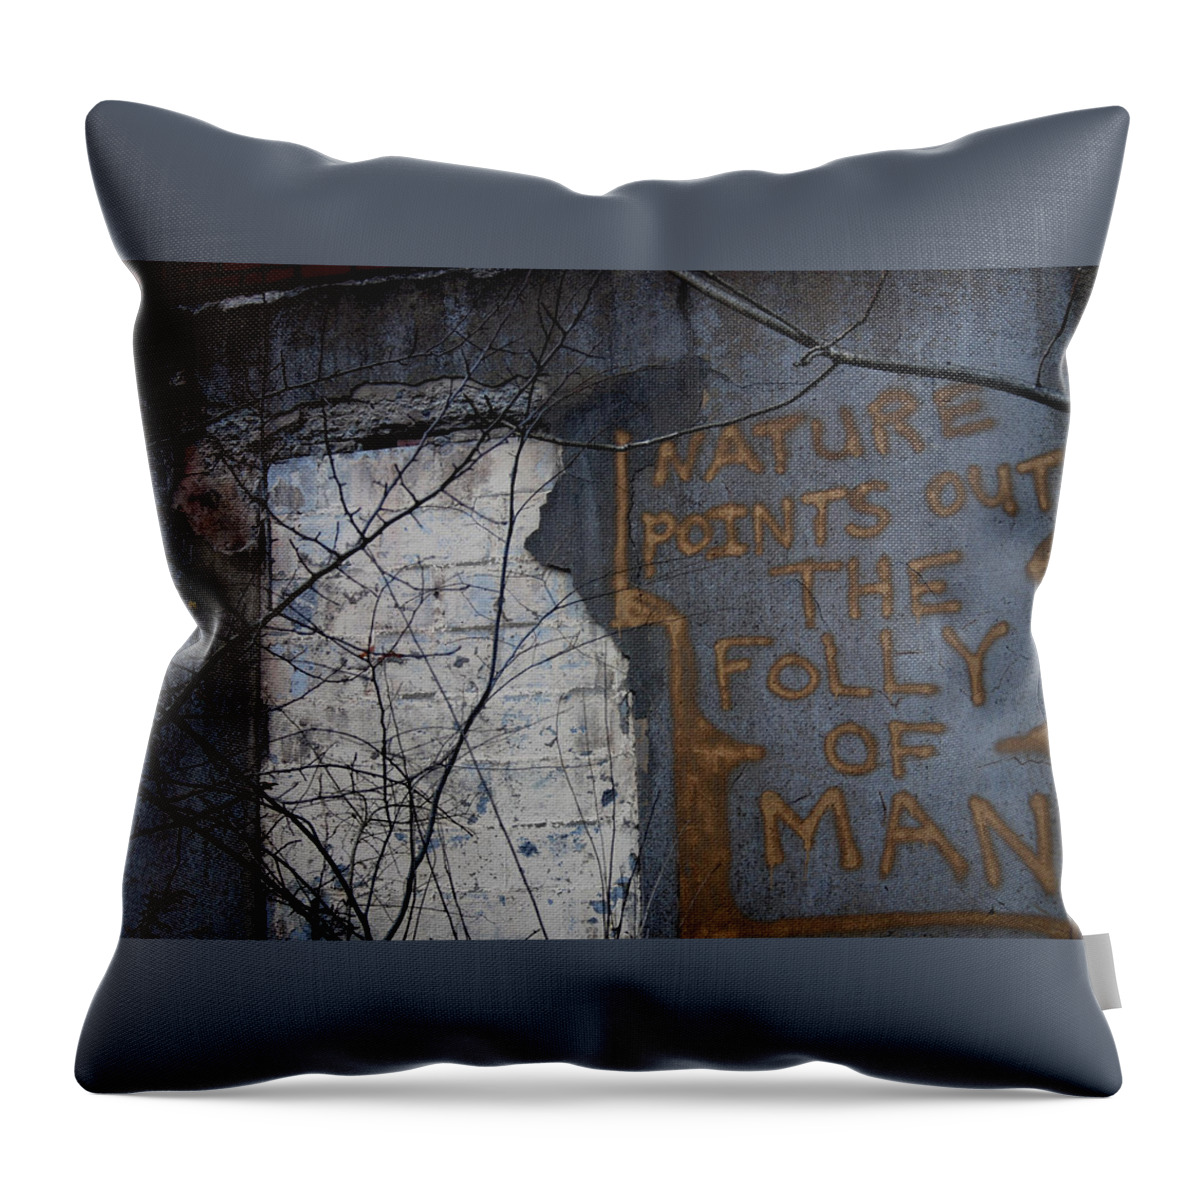  Throw Pillow featuring the photograph Poignant by Melissa Newcomb